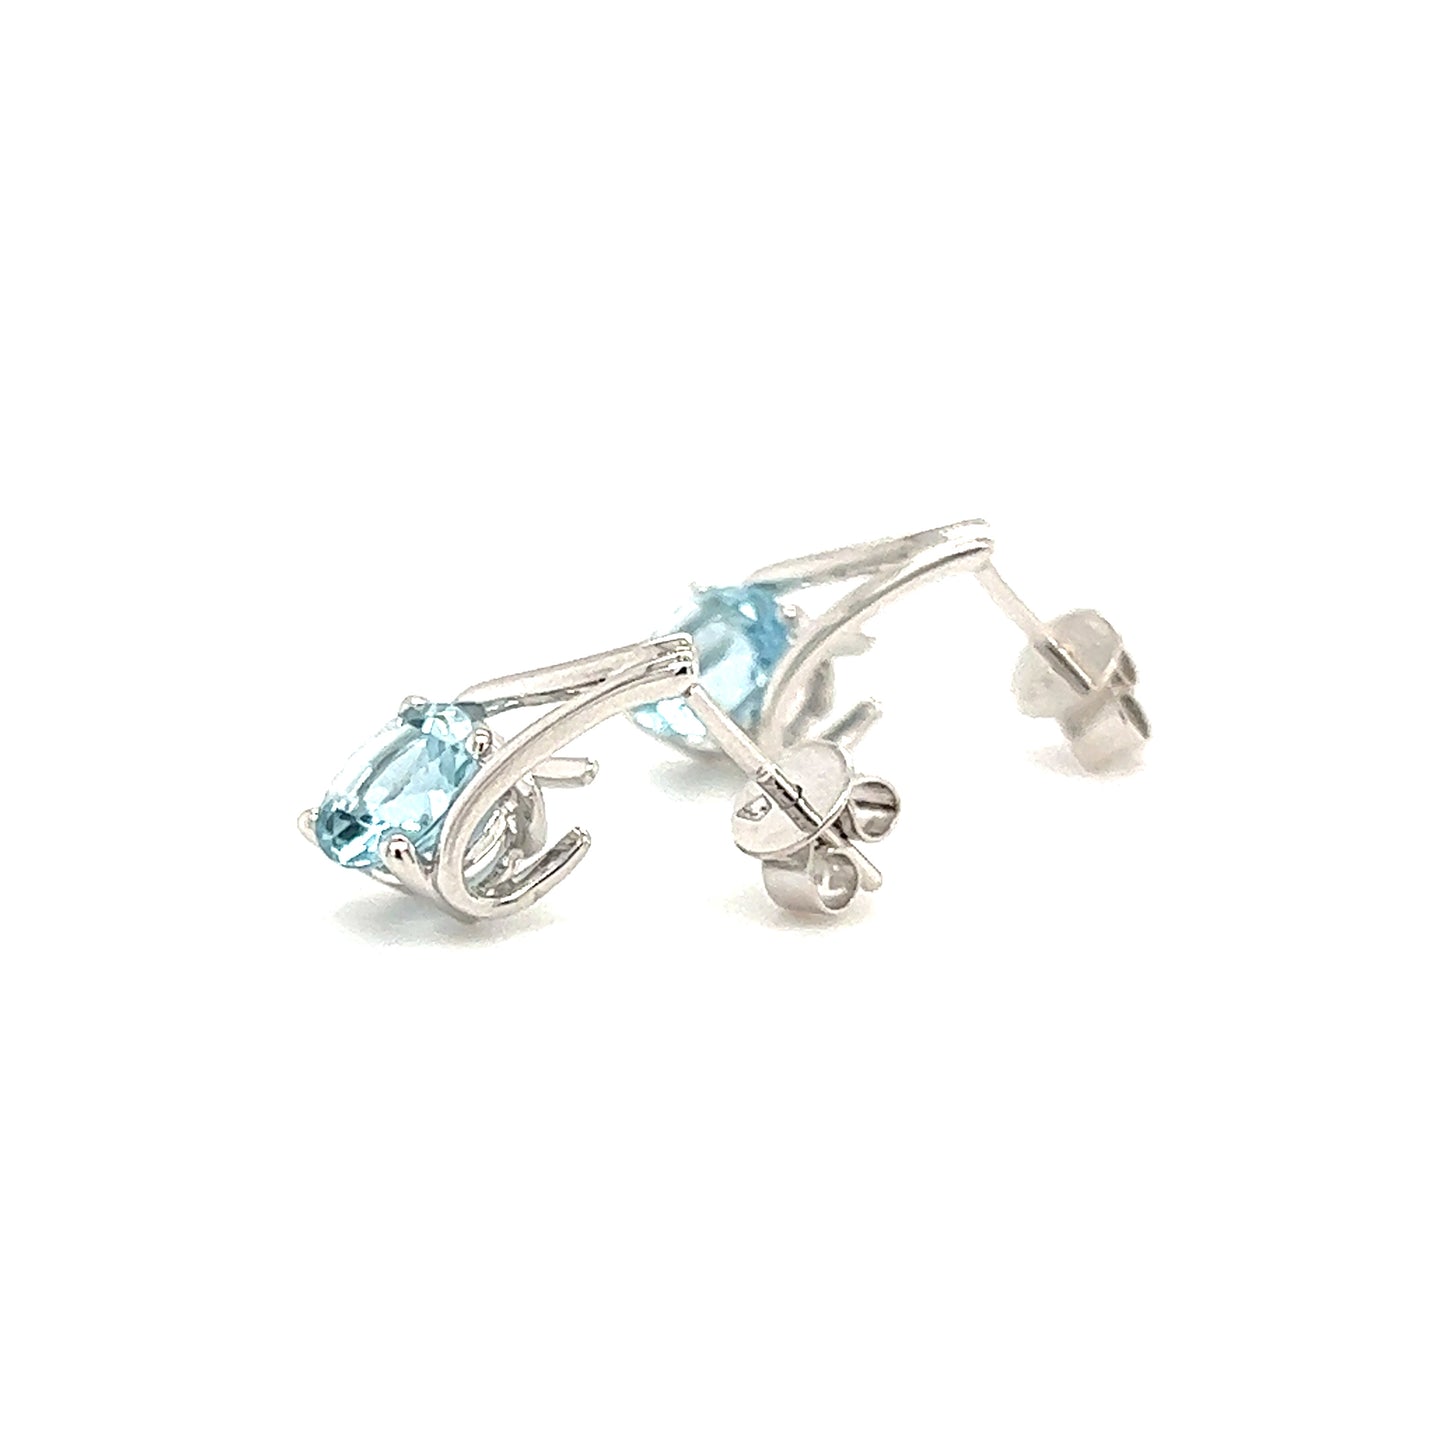 Round Aquamarine Earrings with V-Shaped Bars in 14K White Gold Profile View